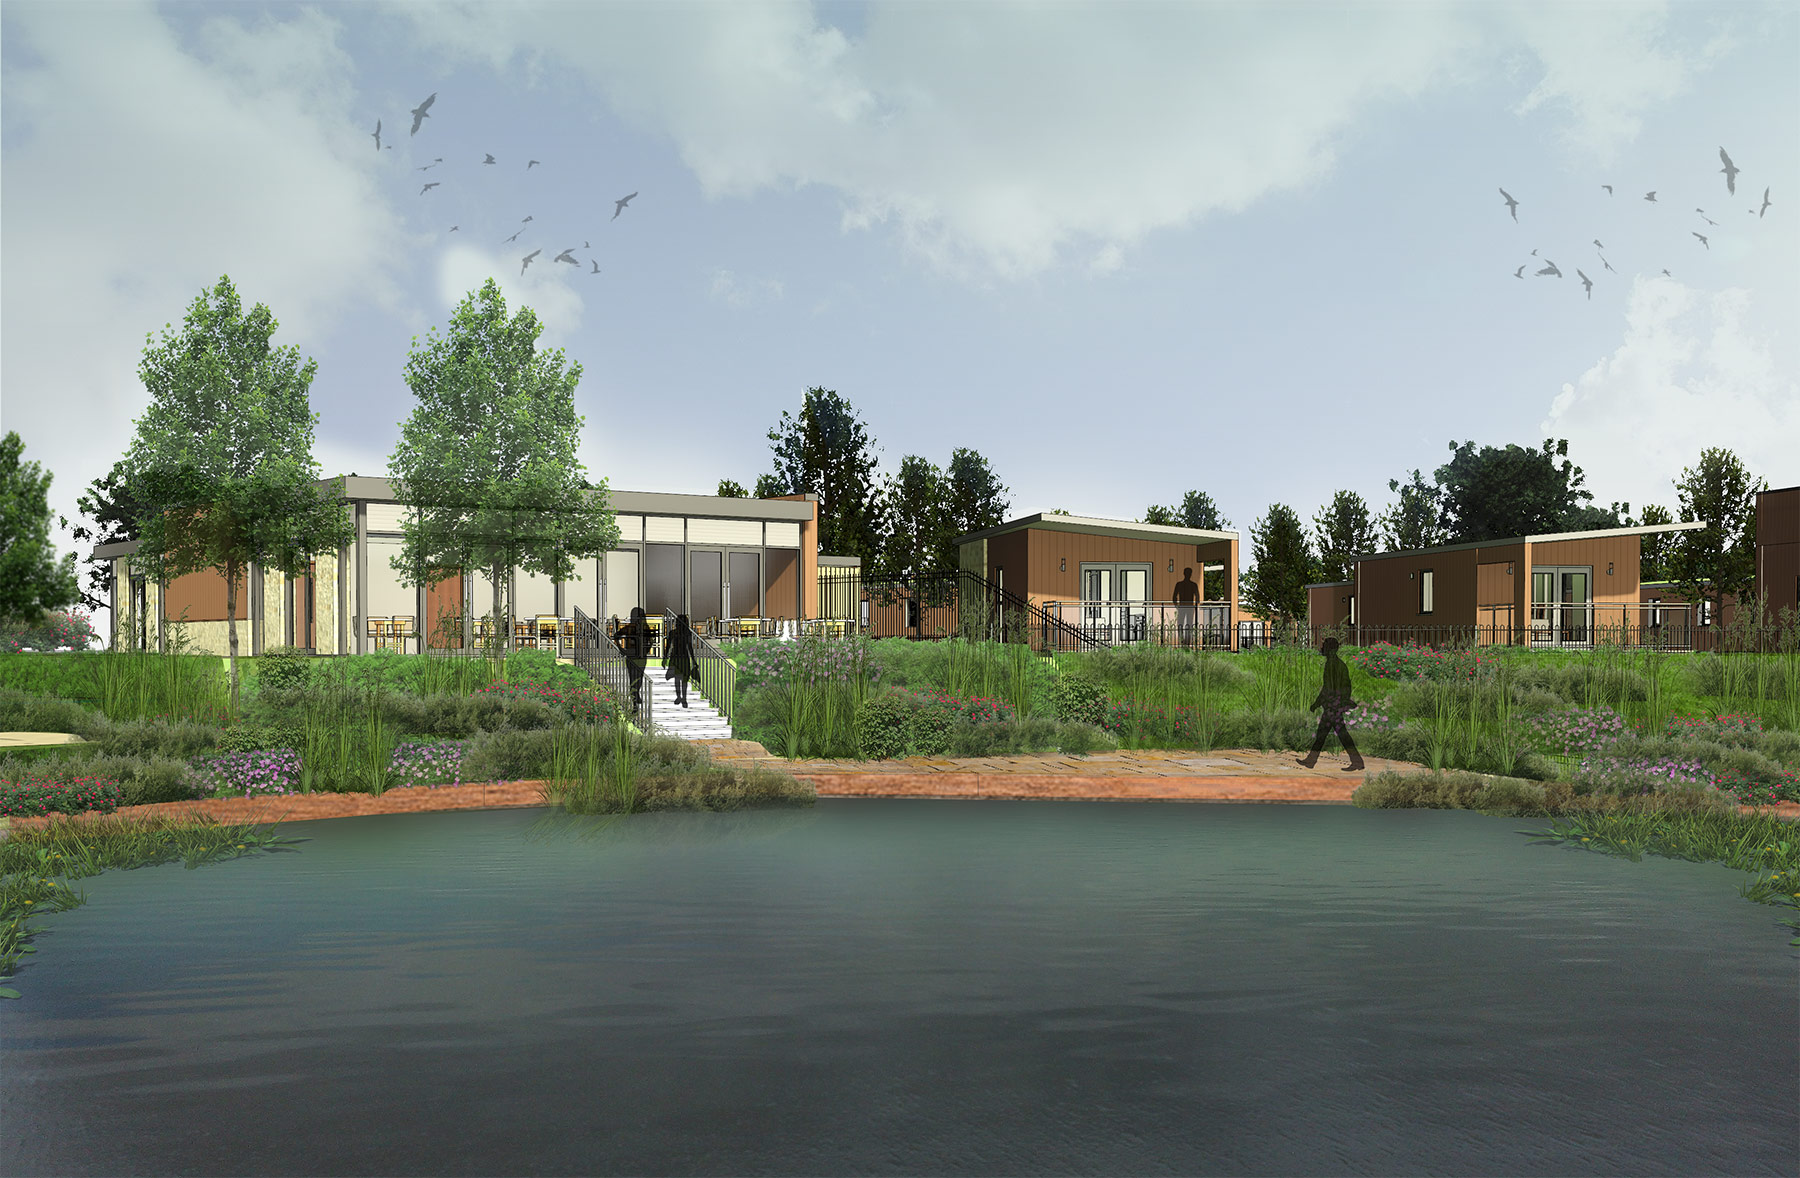 3D visual of cafe community building from canal